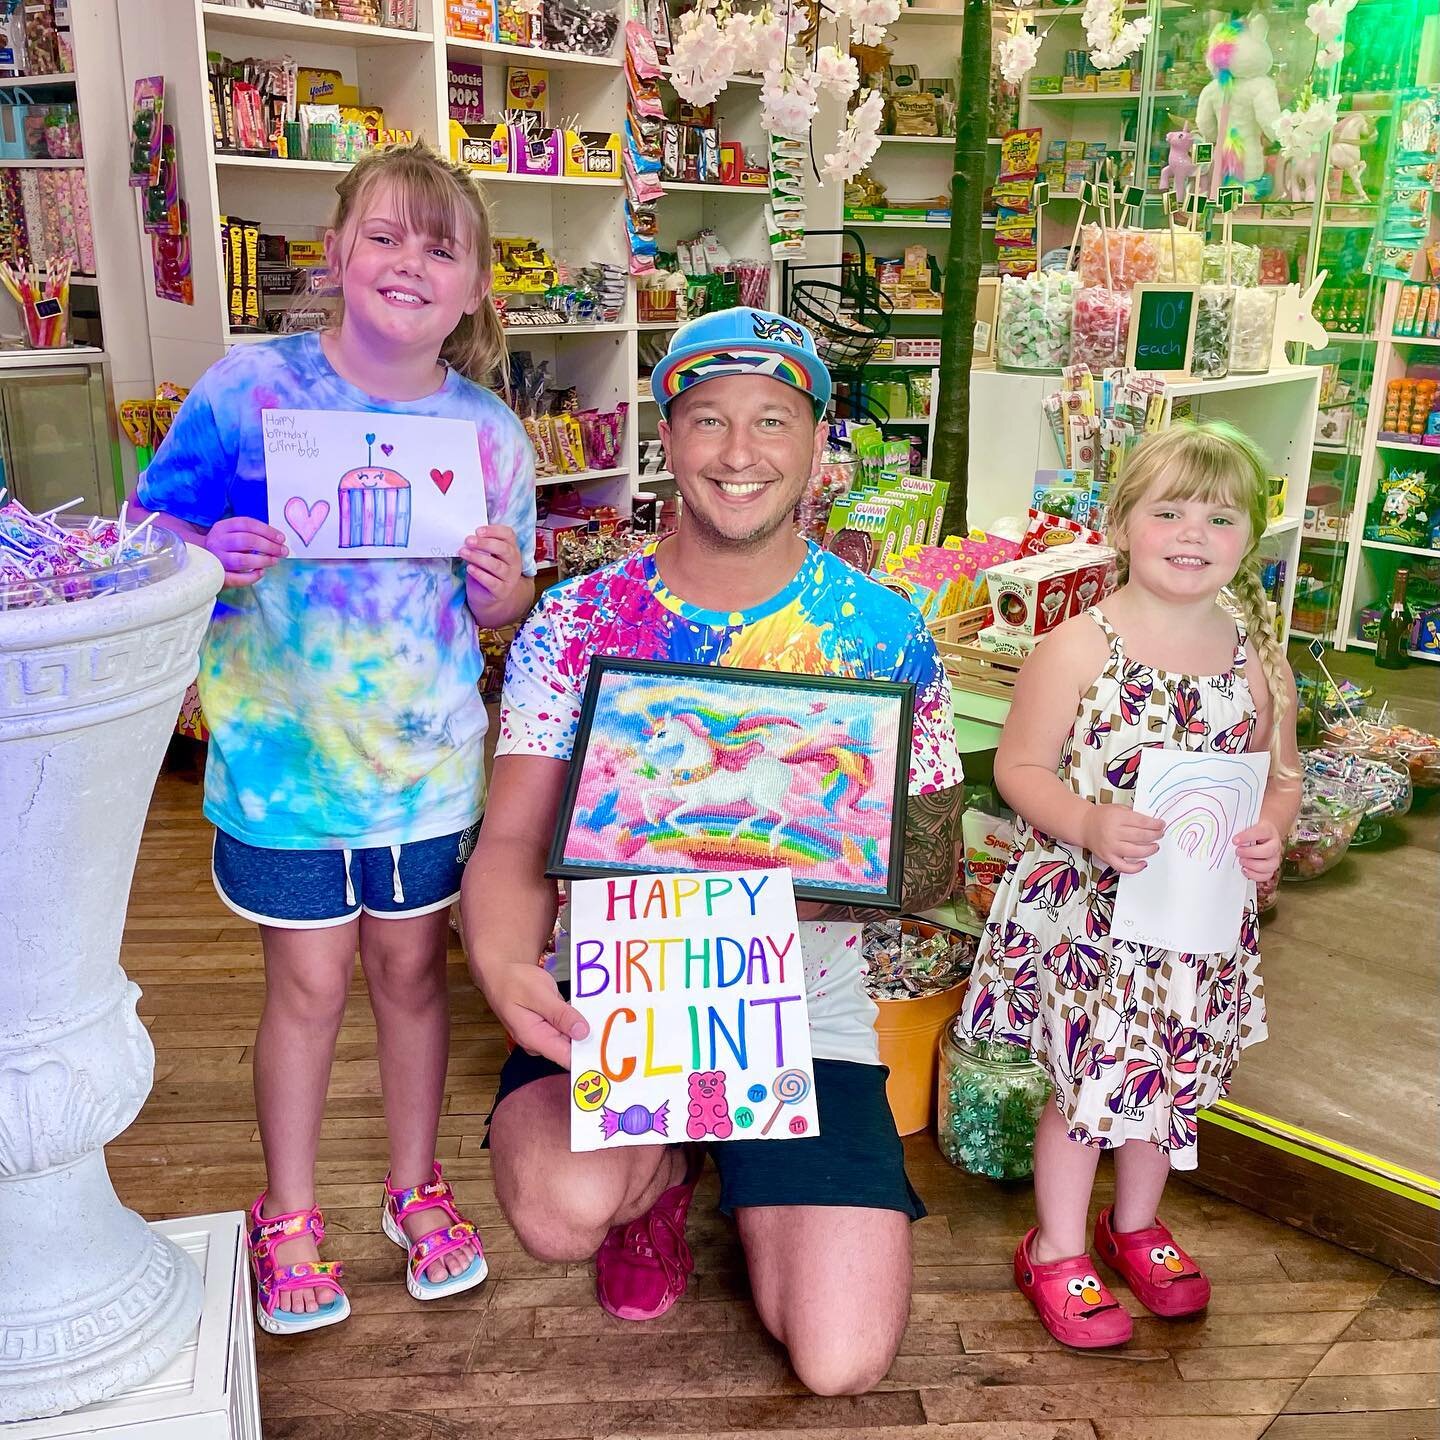 Yesterday Tabitha Ebaugh Yeaglin along with Mazie and Sunnie, surprised me a day early with bday cards and an Epic Diamond Art for The Candy Unicornium!!! Then I got to catch up with them again at Cones With A Cop at Udder Bliss Creamery, LLC!!! What